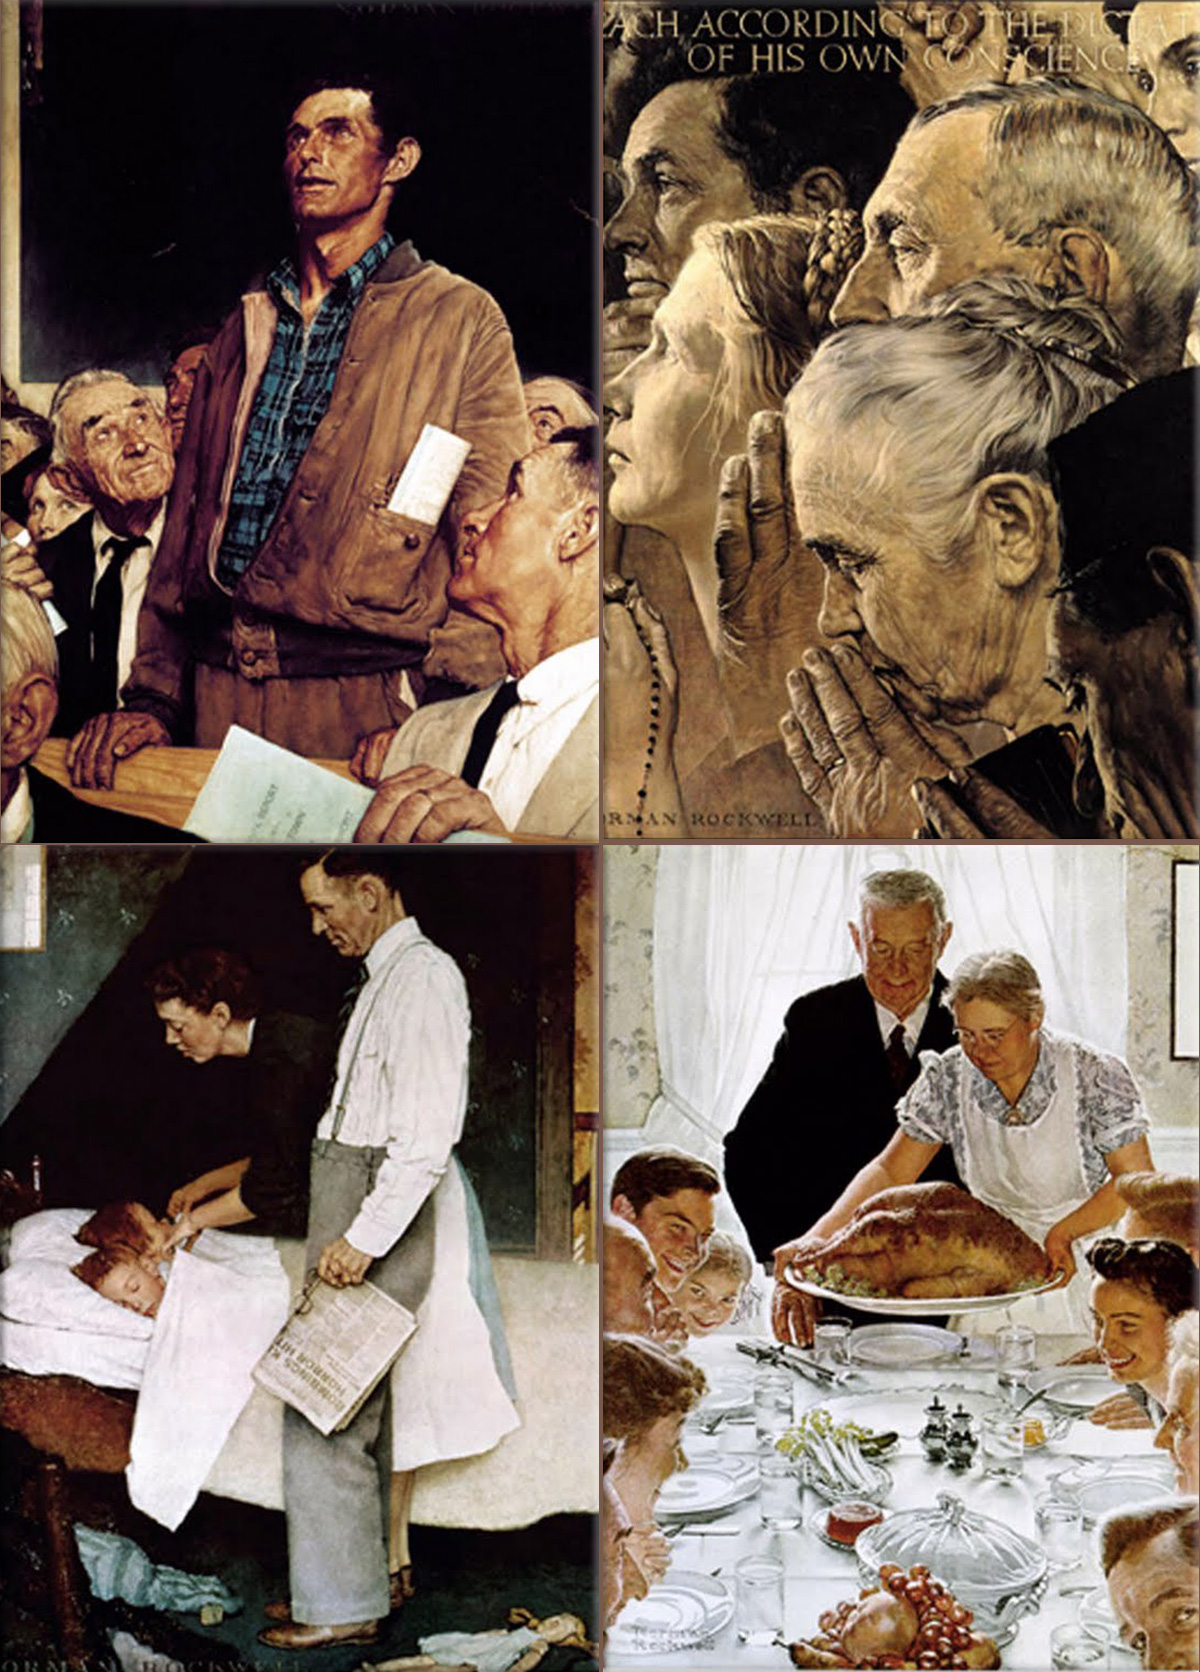 World War II: Four Freedoms (Norman Rockwell); Freedom of Speech, Freedom of Worship, Freedom from Want and Freedom from Fear